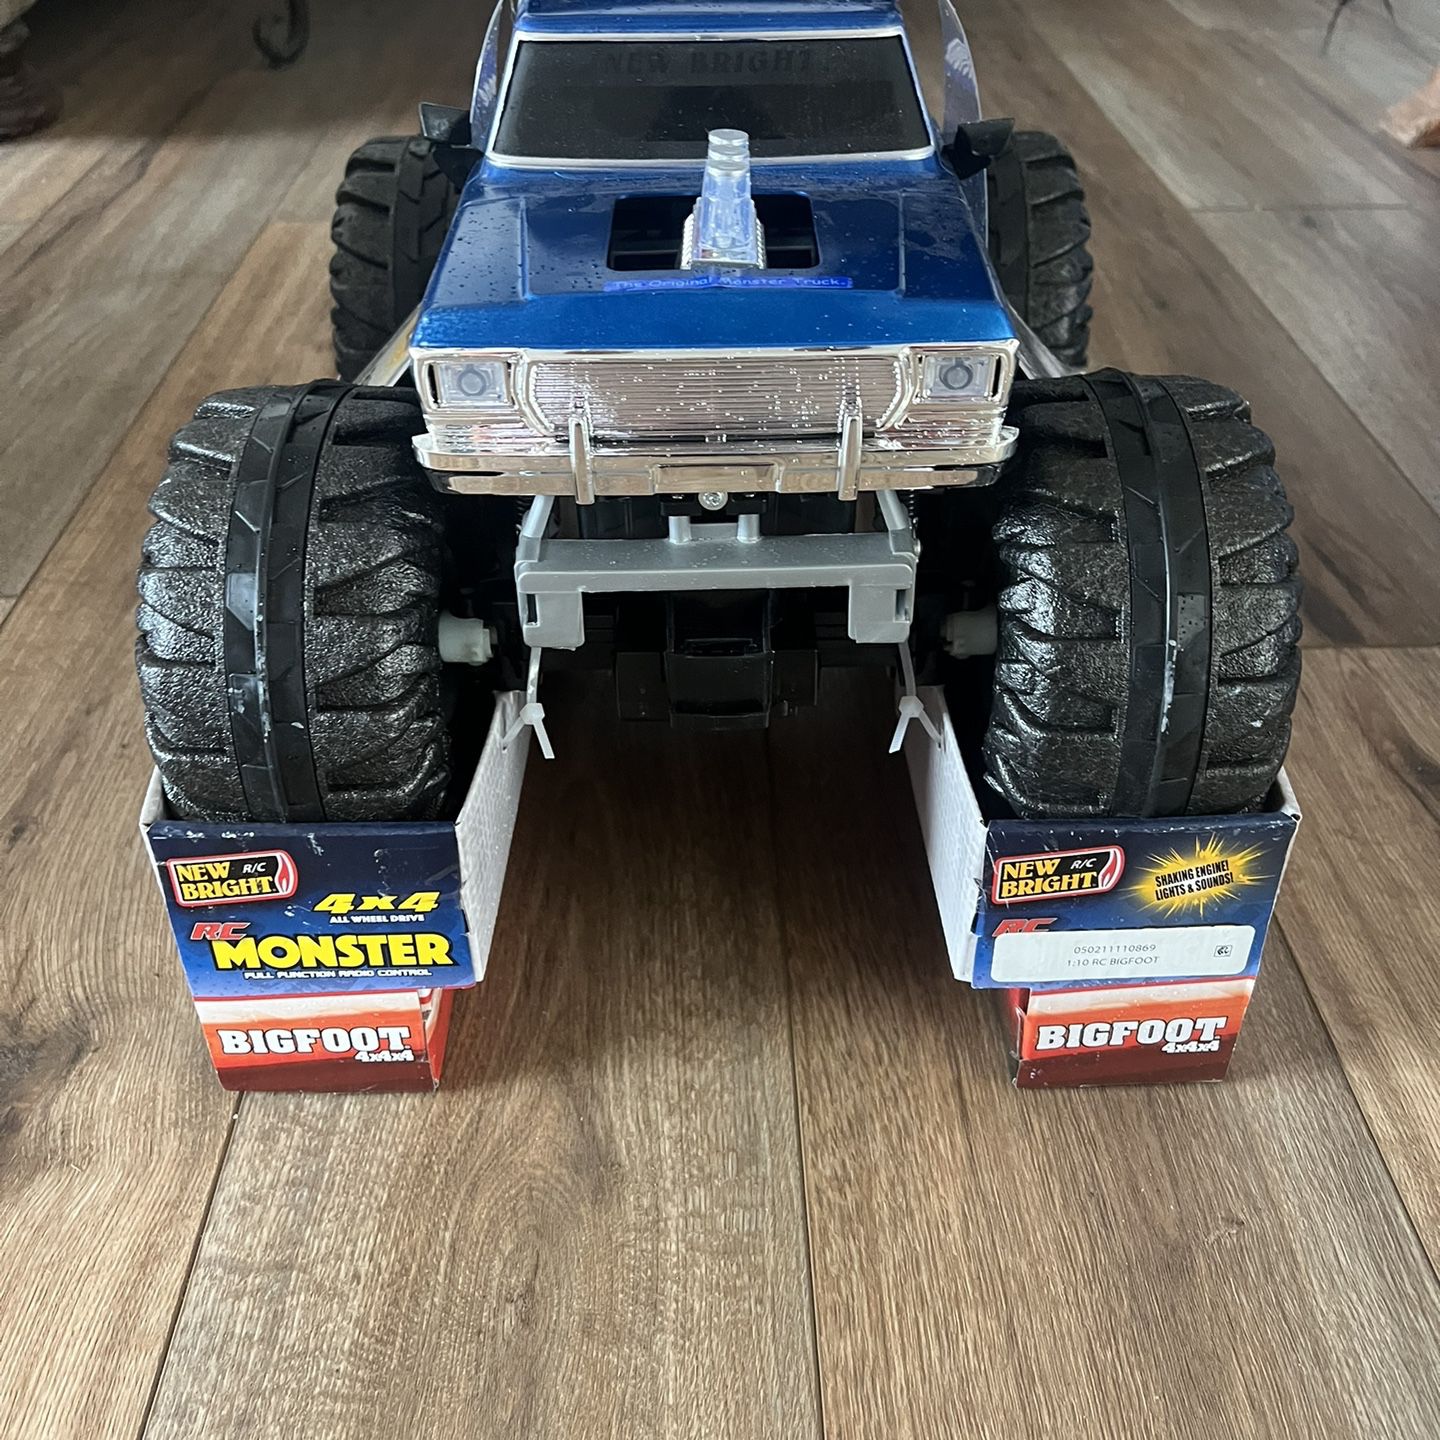 New Bright (1:10) Bigfoot Battery RC Remote Control Monster Truck with  Lights for Sale in Agua Dulce, CA - OfferUp